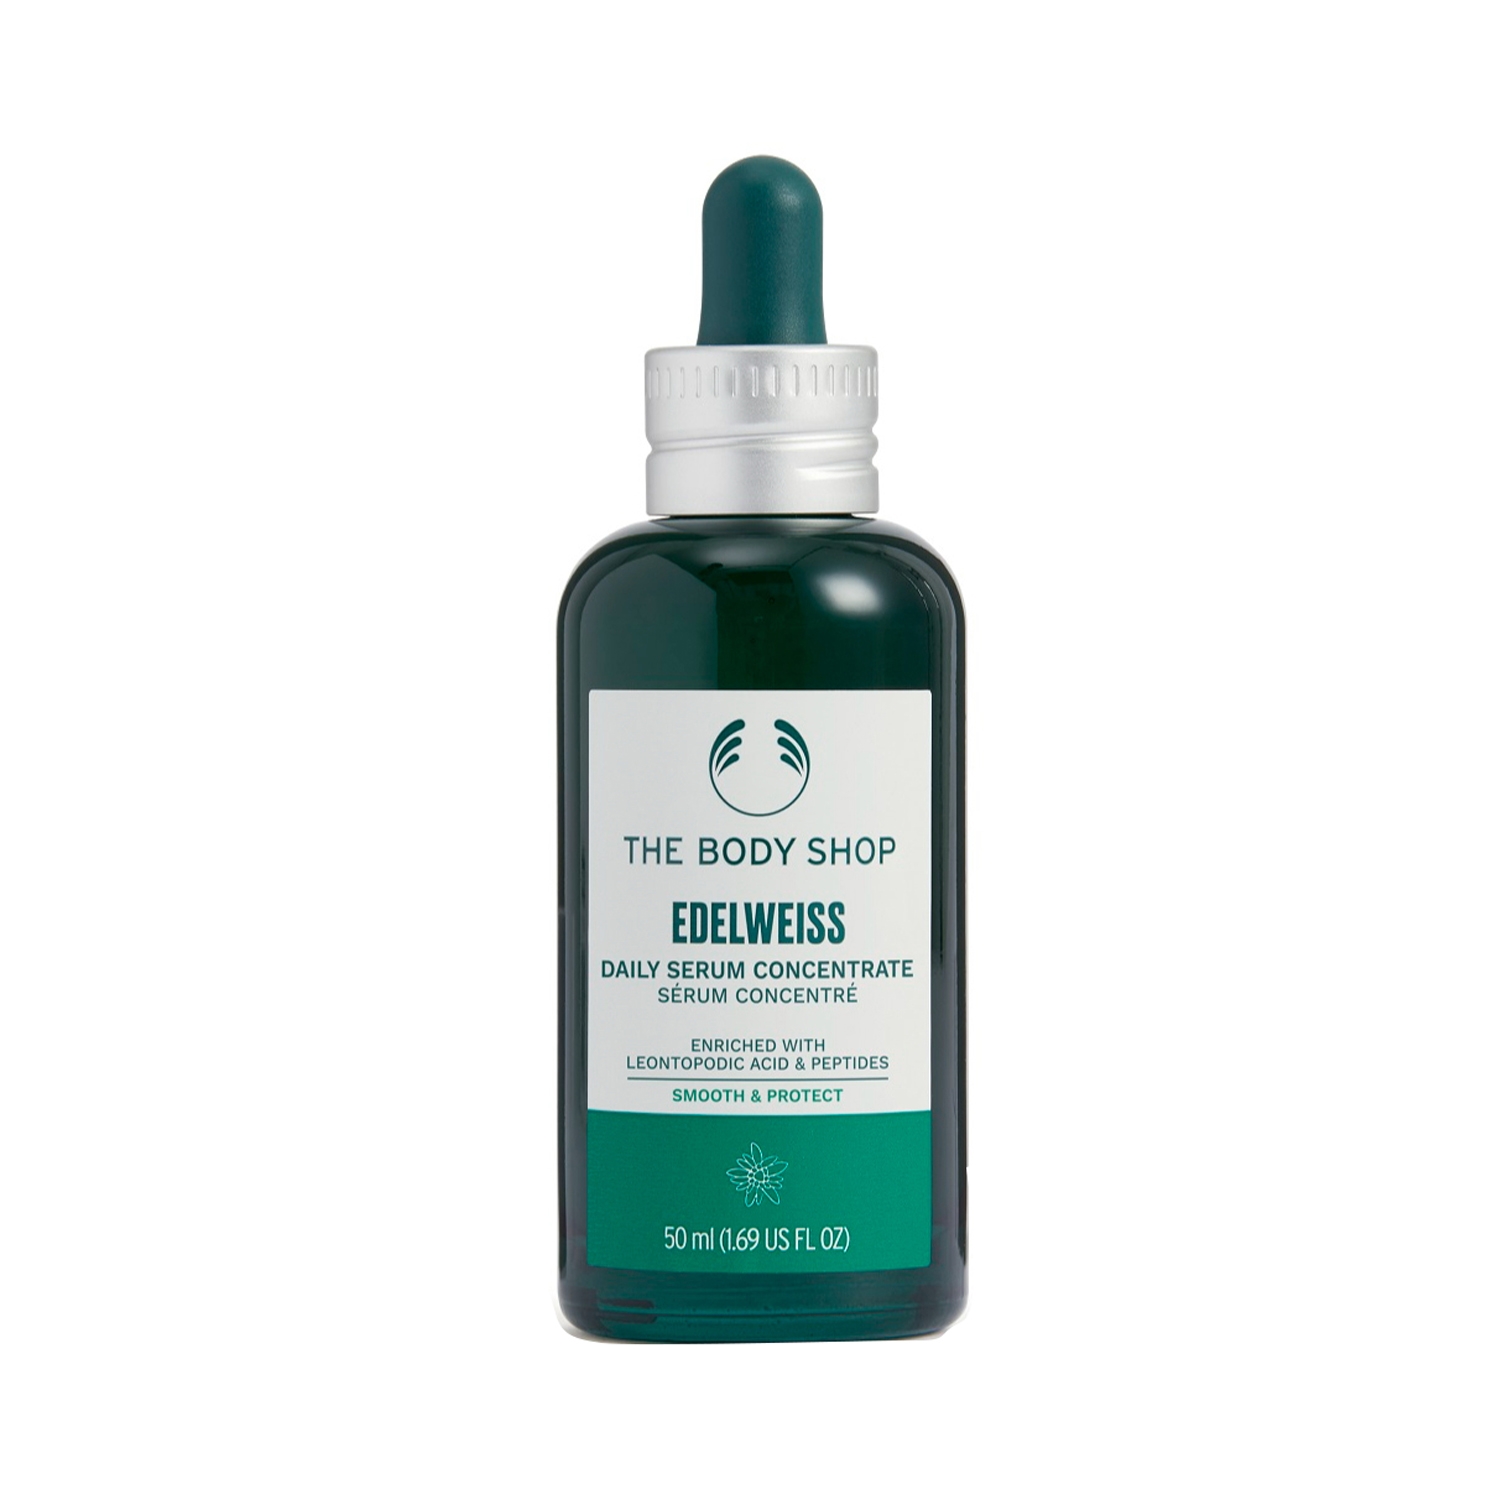 The Body Shop | The Body Shop Edelweiss Daily Serum Concentrate (50ml)